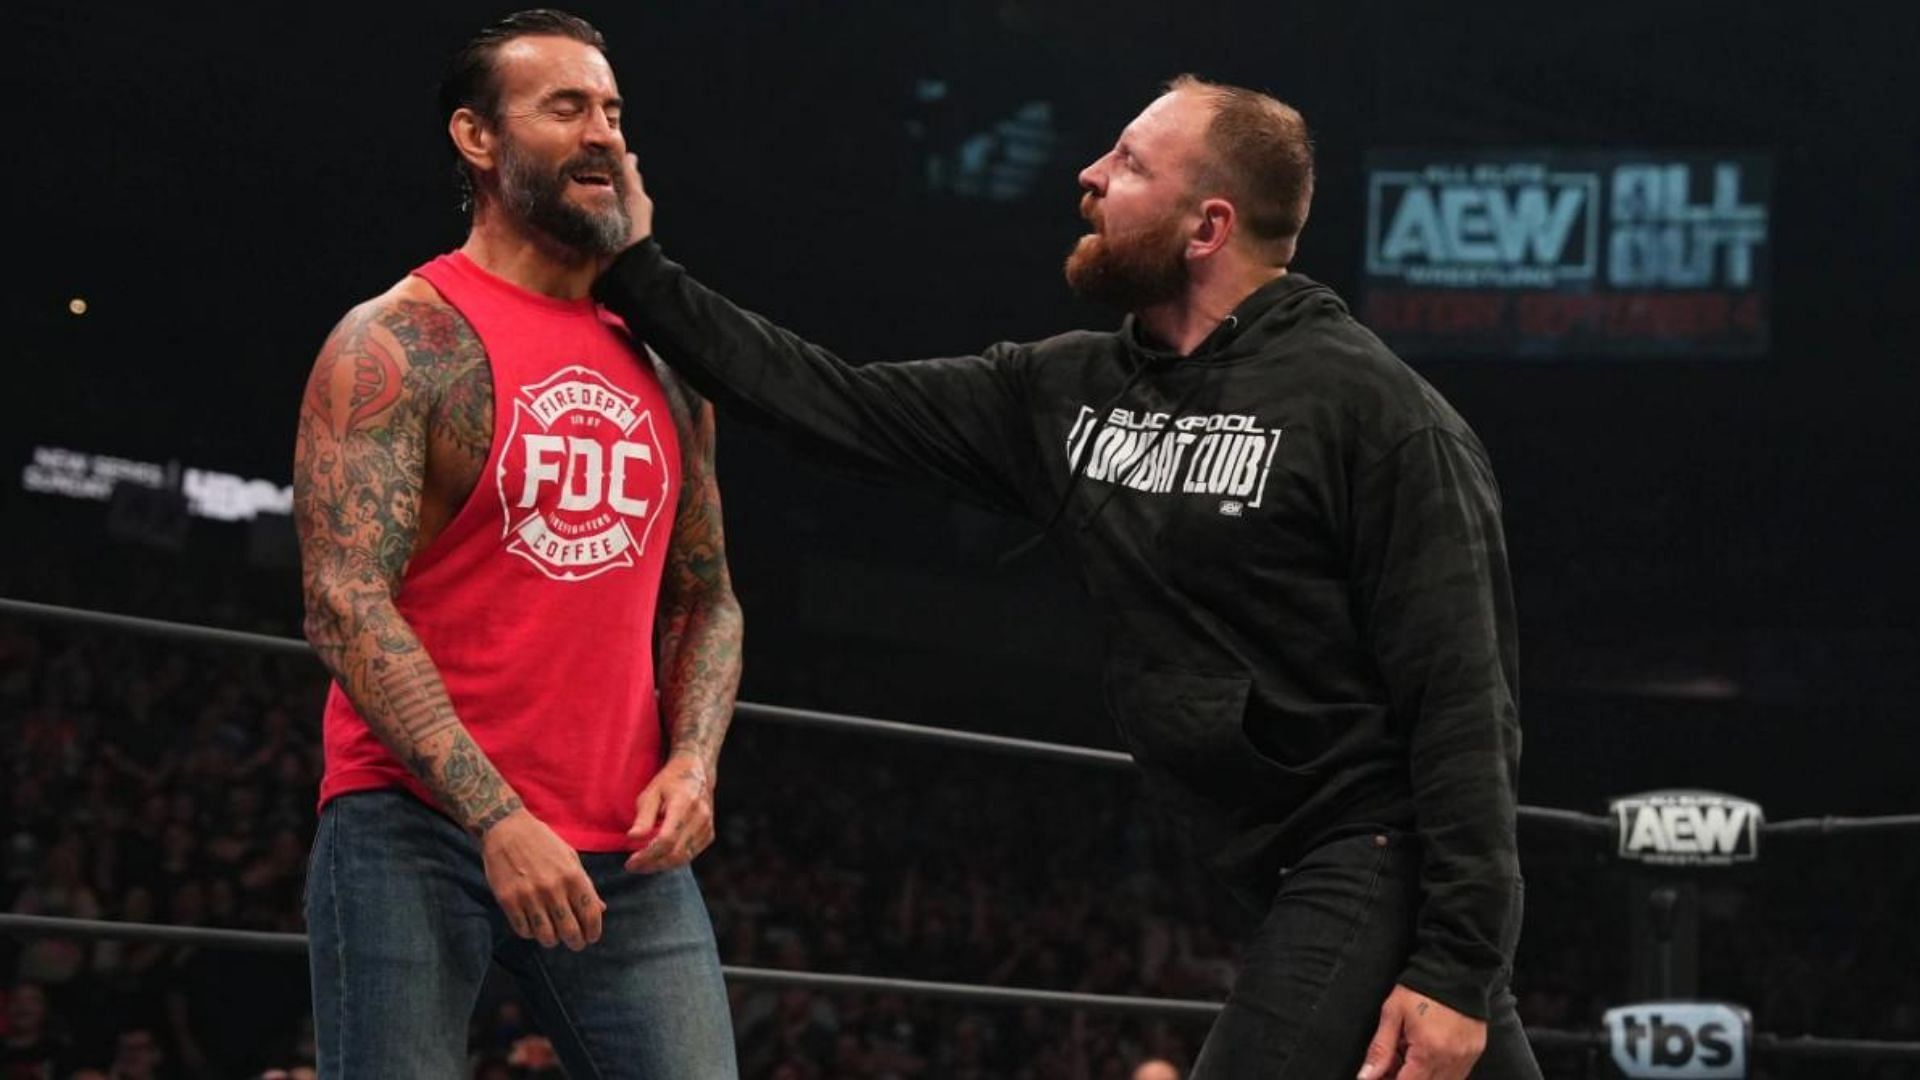 CM Punk and Jon Moxley will collide in a few hours on AEW Dynamite